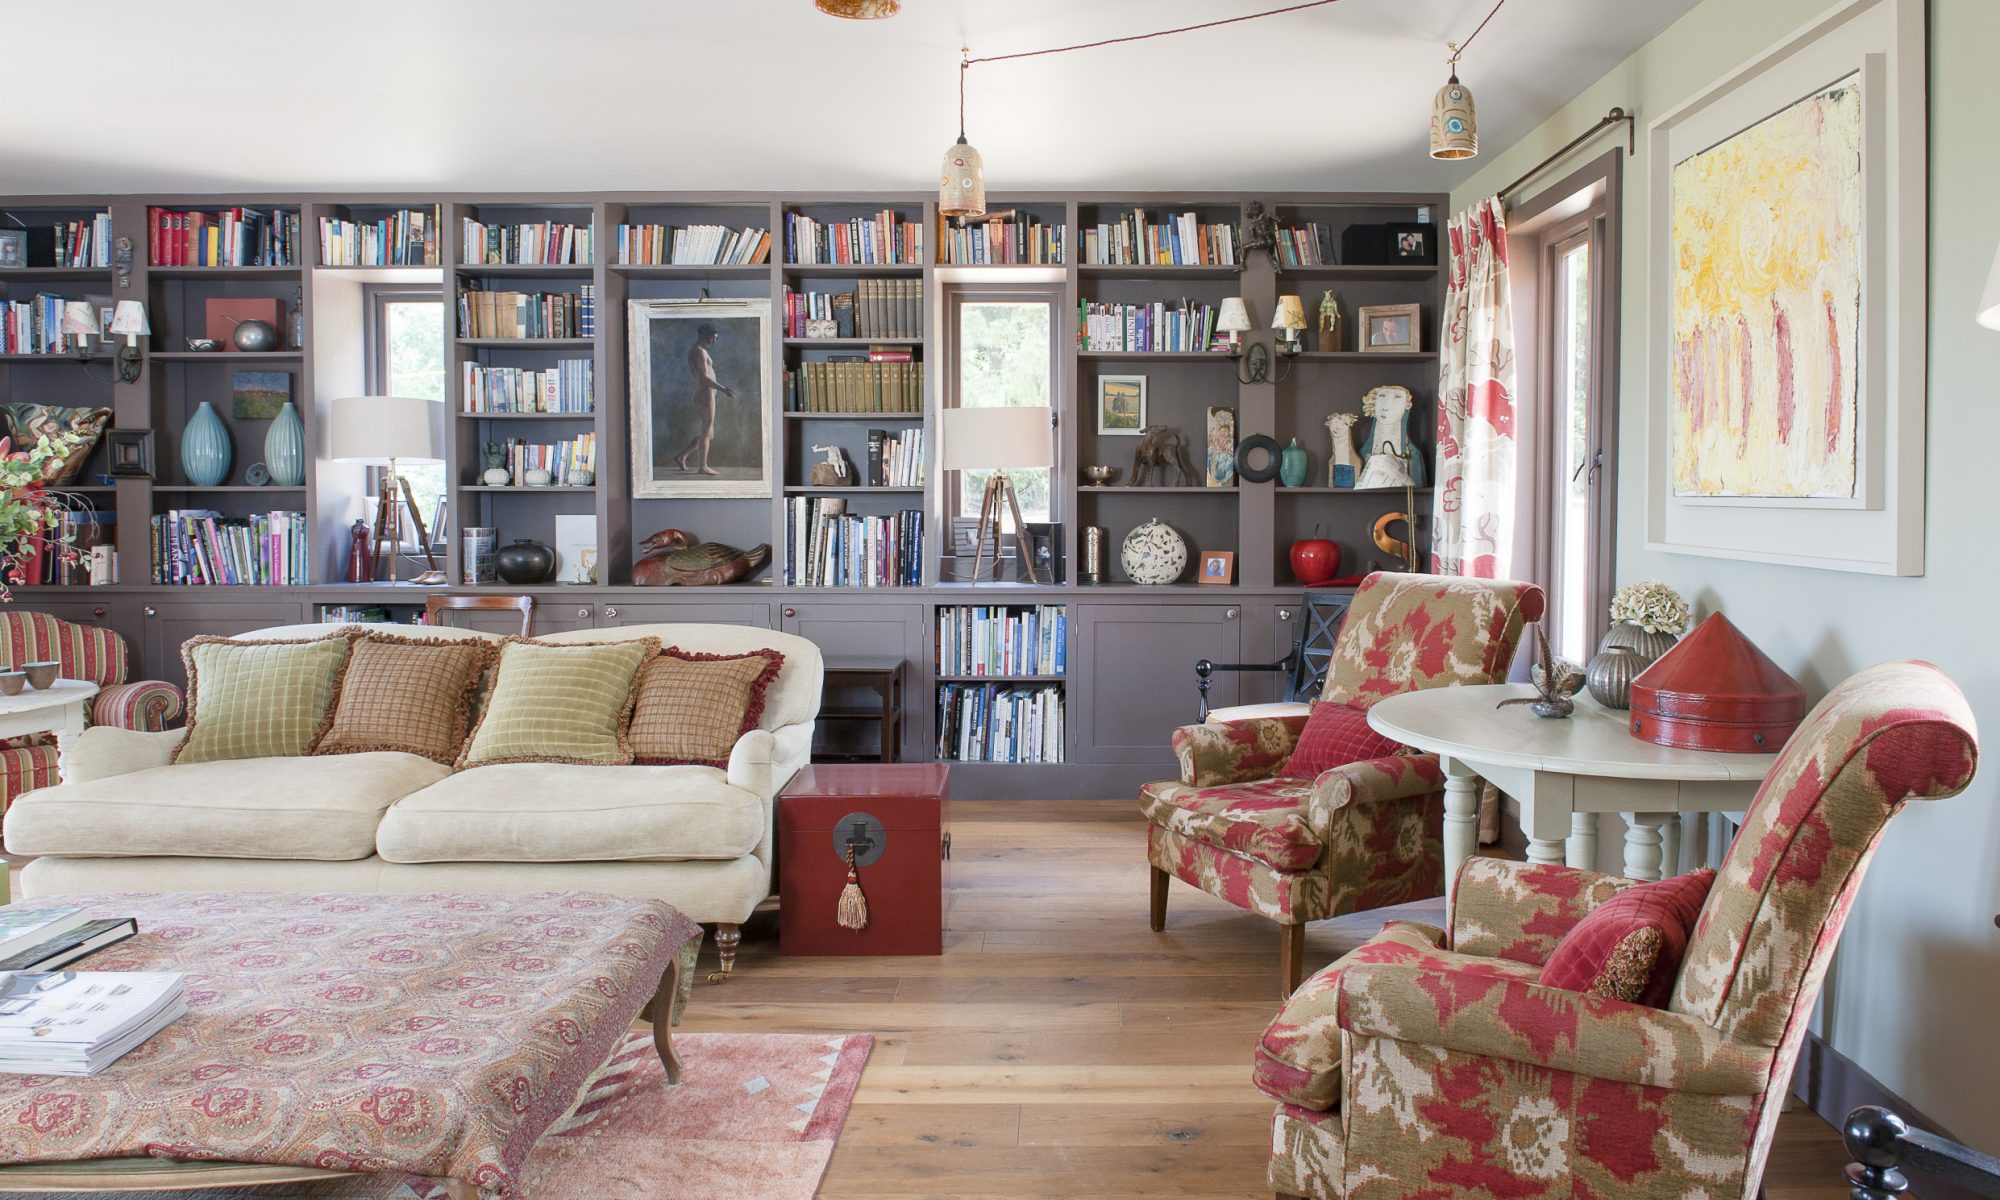 The double aspect drawing room runs the depth of the house and features bookshelves that span the length of one wall